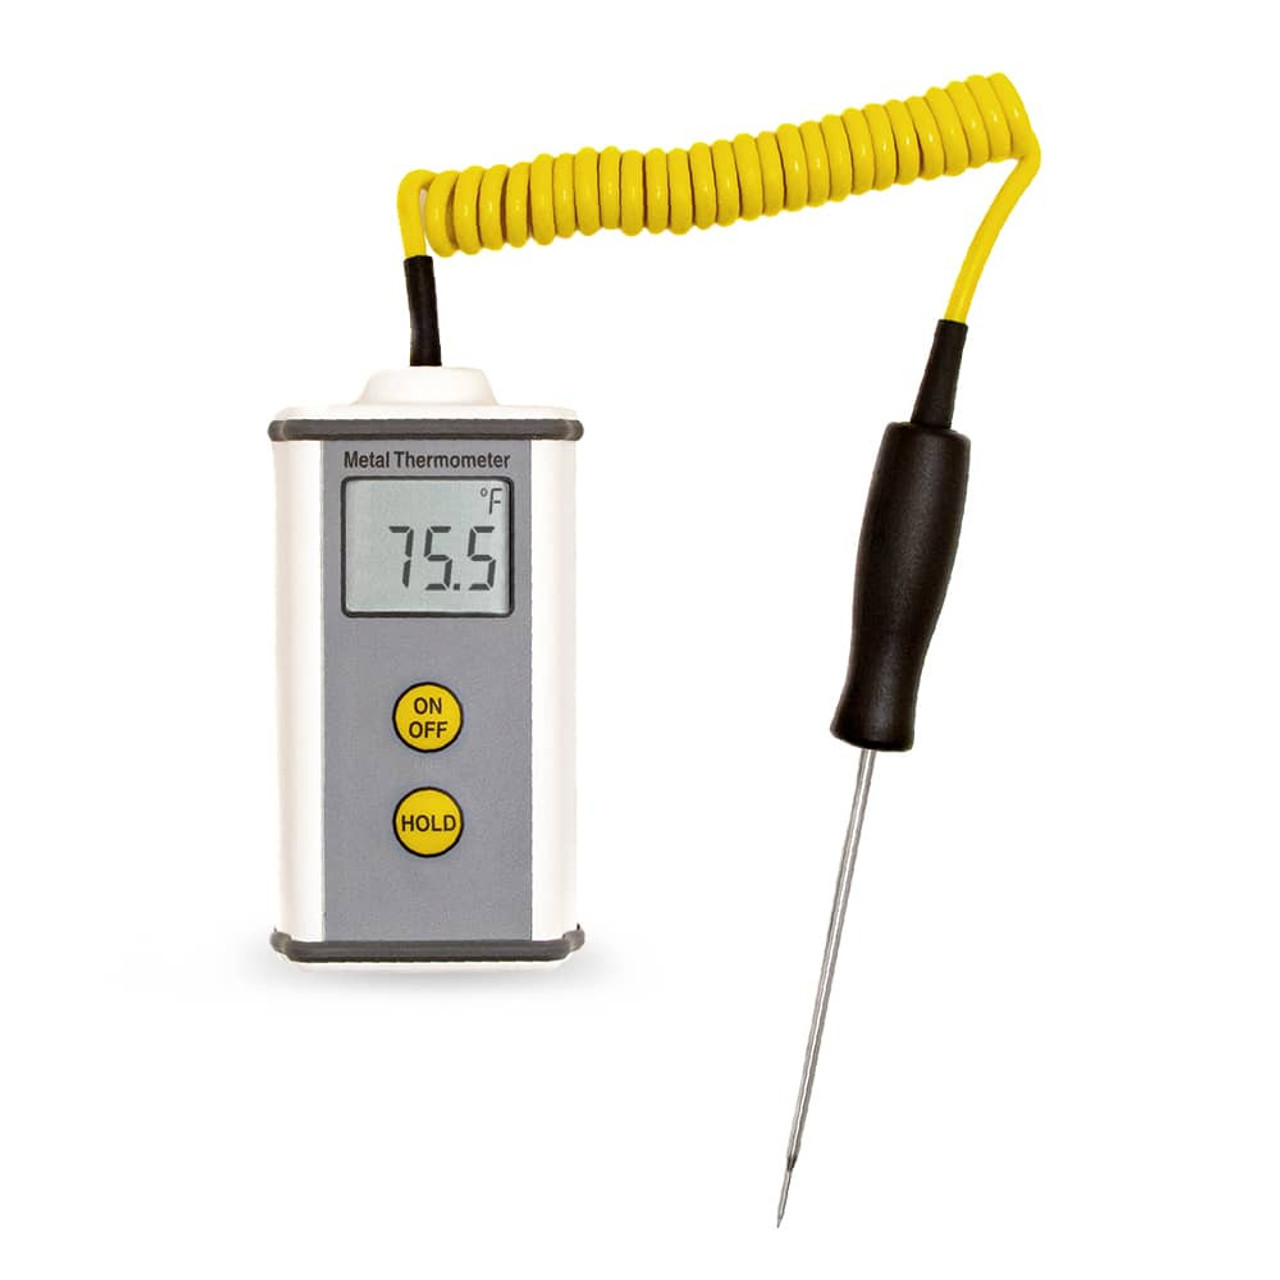 Digital thermometer with fixed probe Catertemp Plus